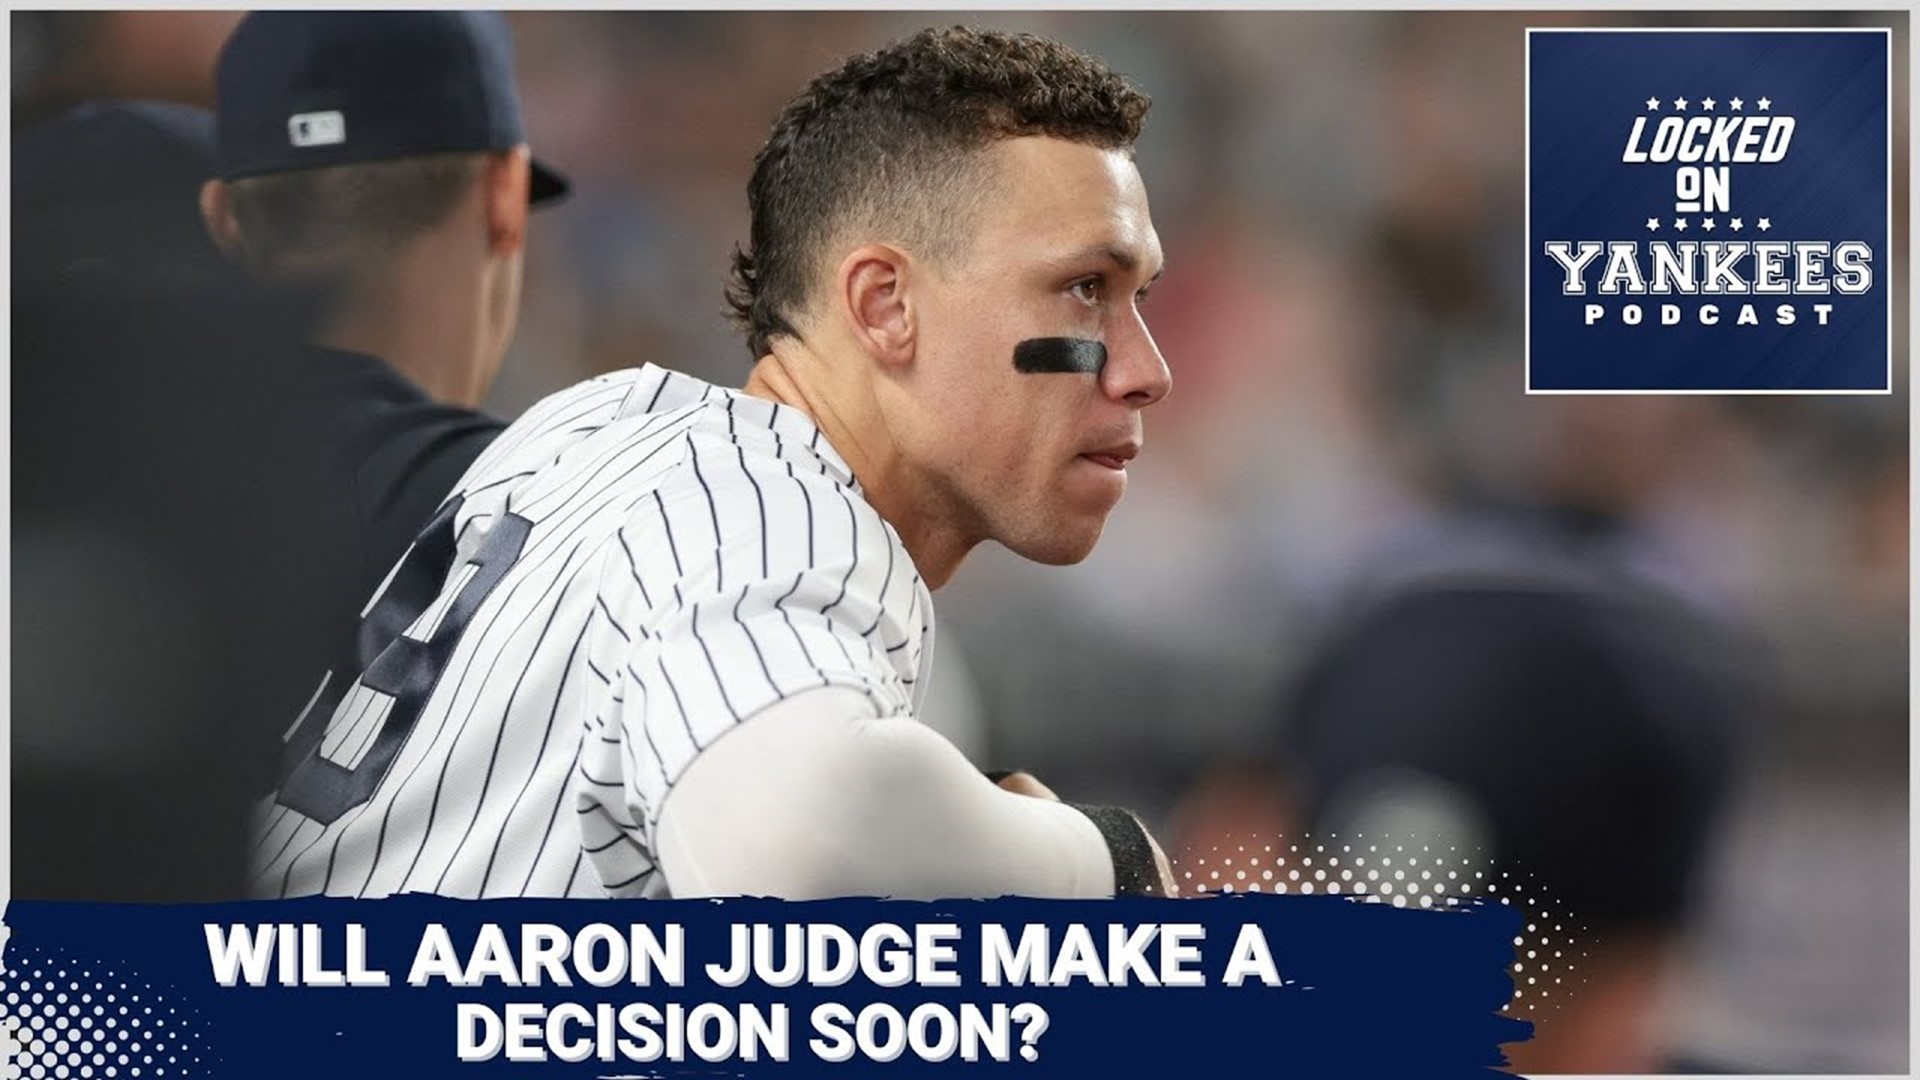 Aaron Judge has unfinished business with Yankees future in doubt